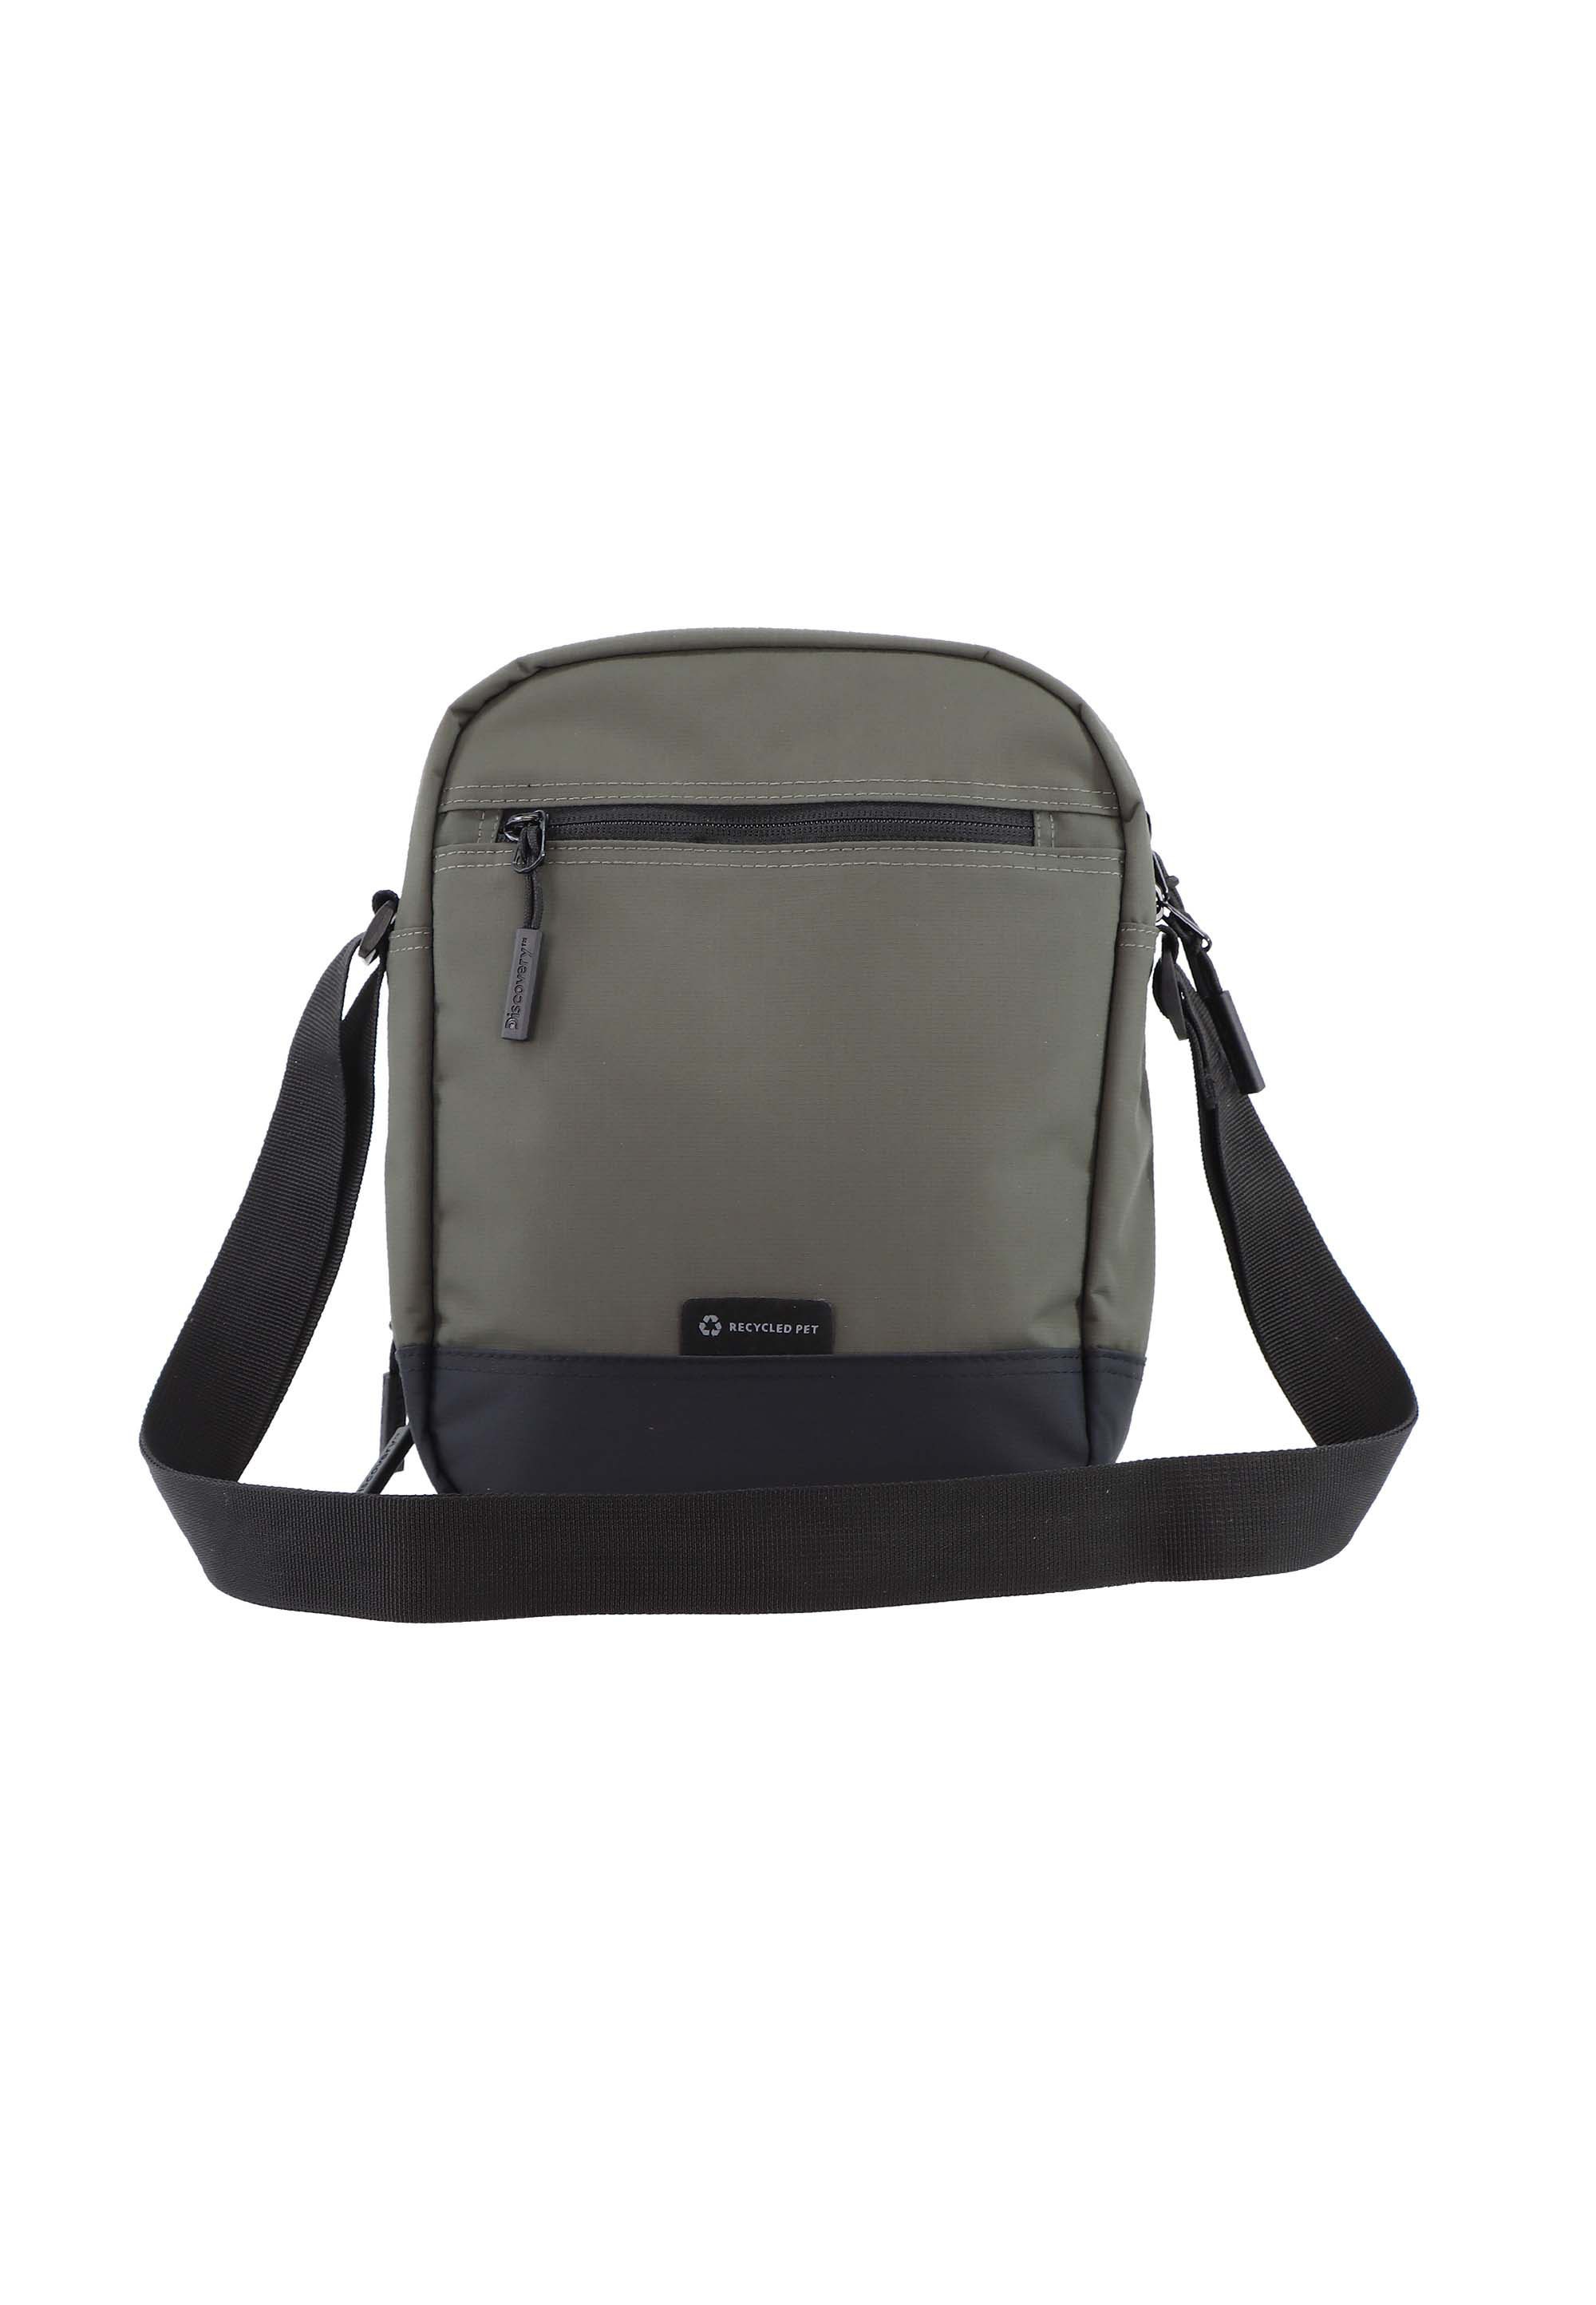 Discovery Laptoptasche »Shield«, mit rPet Polyester-Material